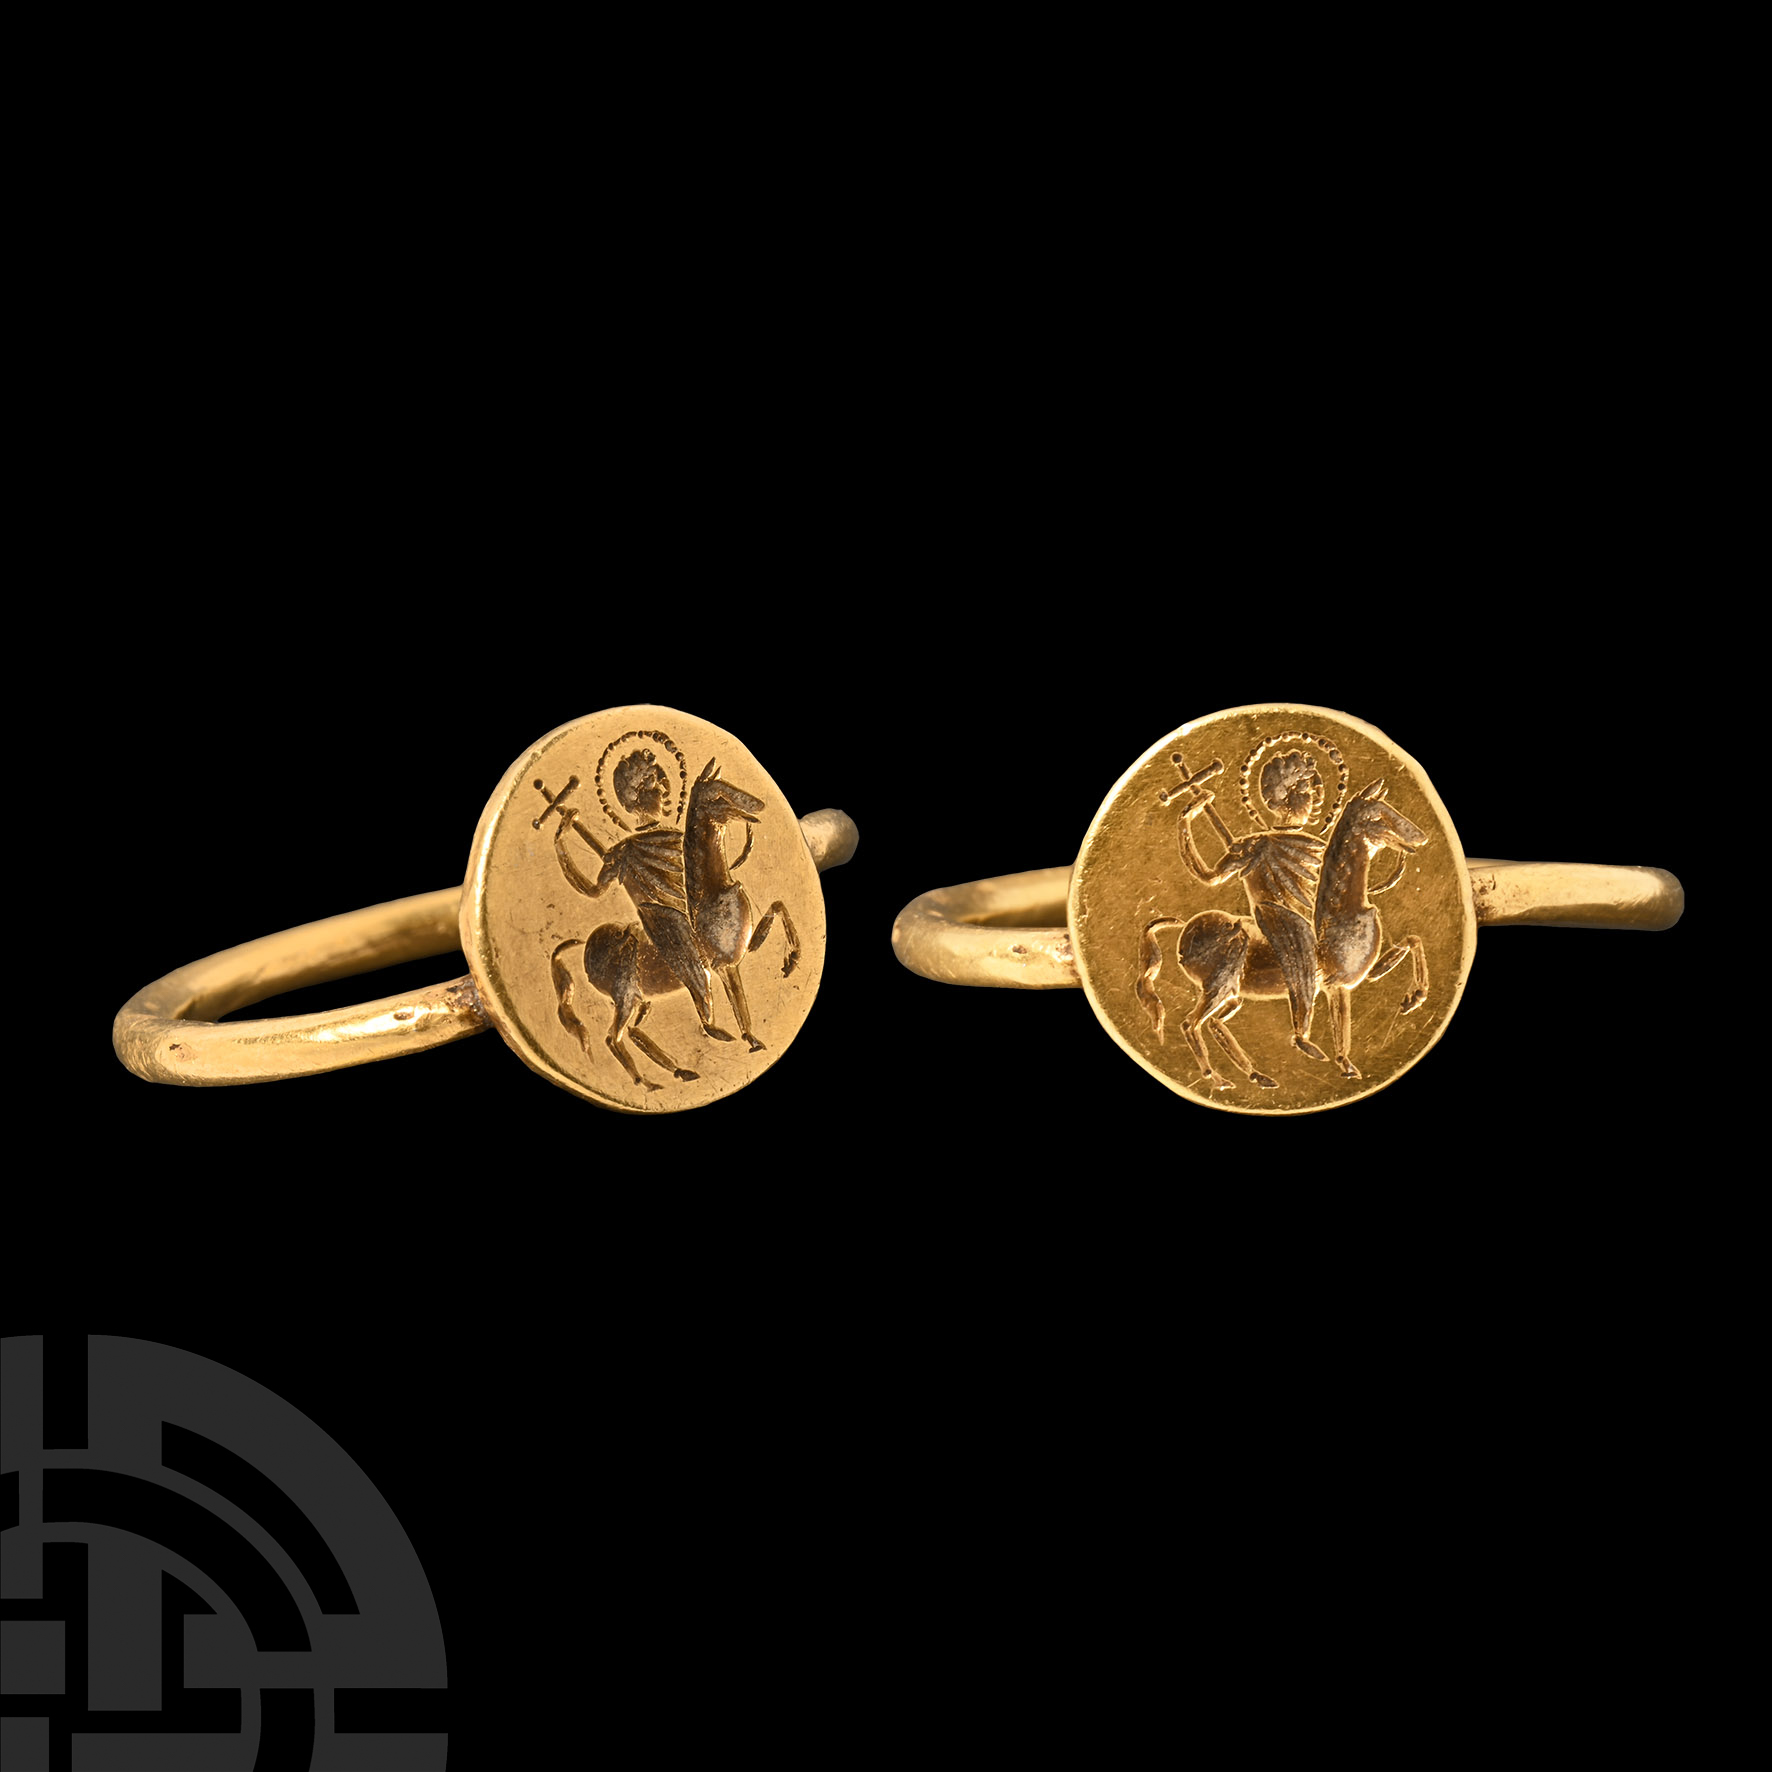 Byzantine Gold Ring with Holy Rider